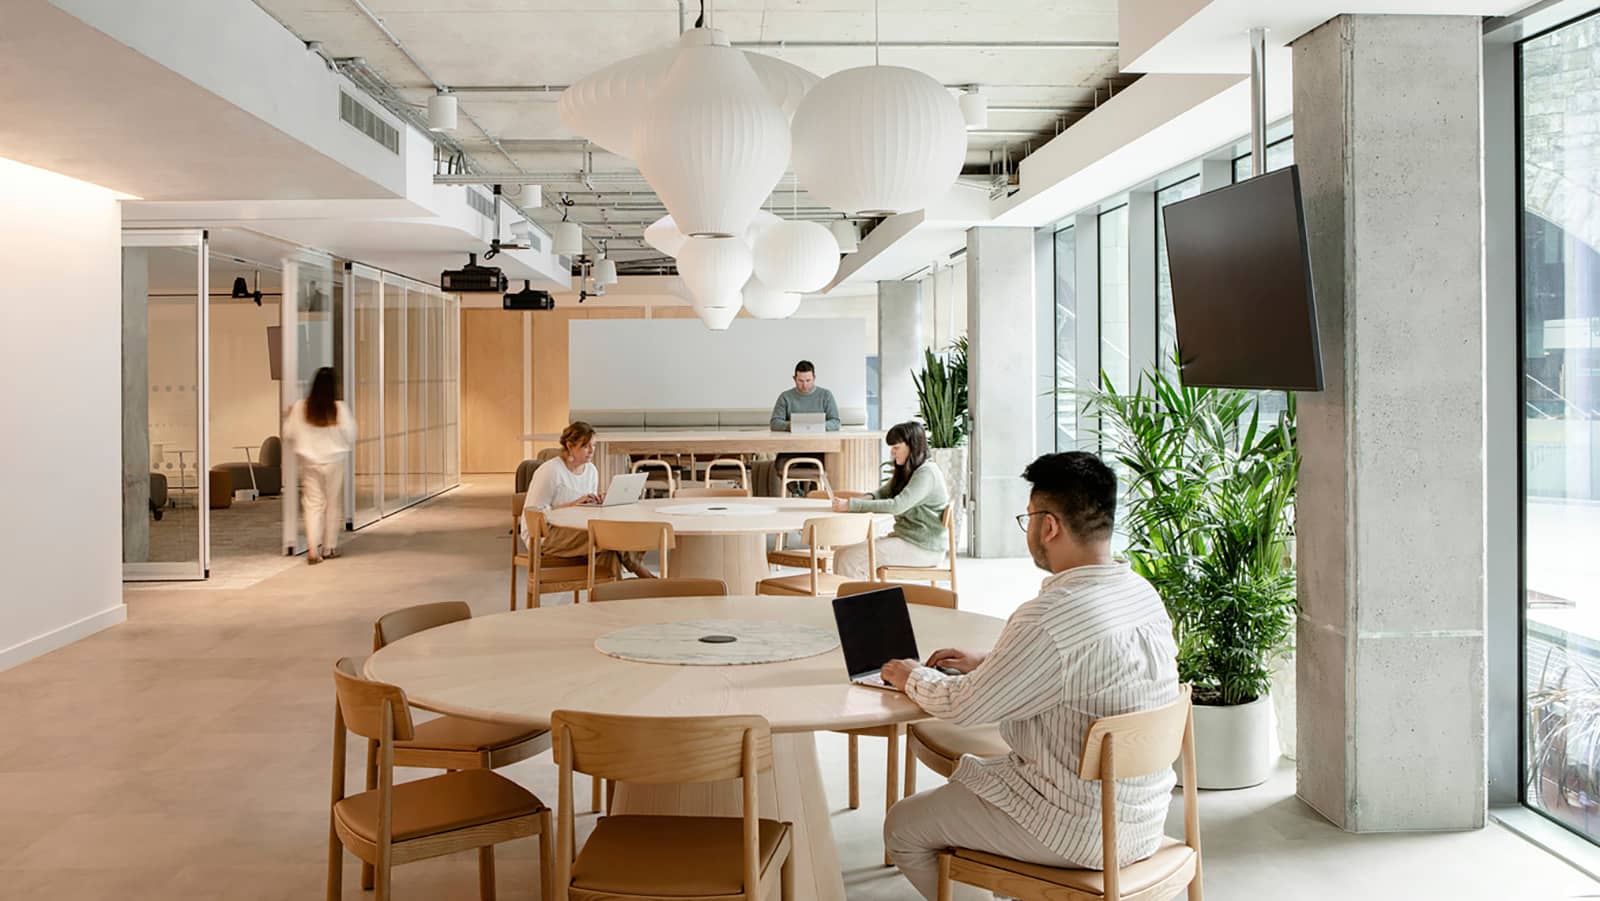 Dropbox's Dublin offices feature a large open area with wide tables, ideal for collaboration.